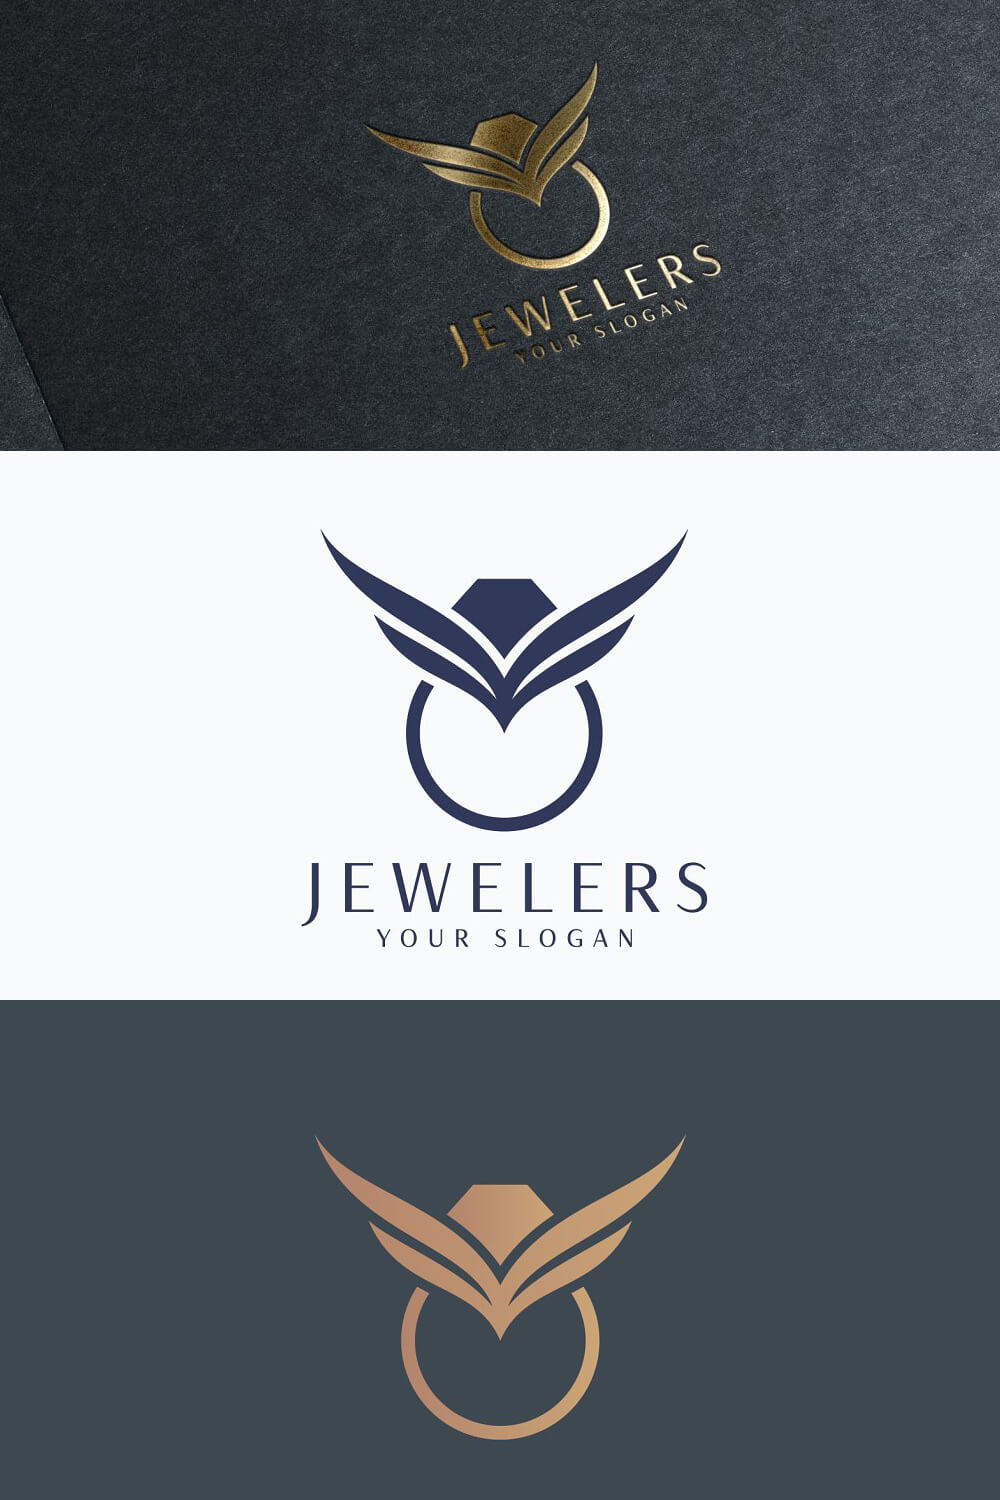 Three variations of the jewelry rings logo on dark, white and gray backgrounds.